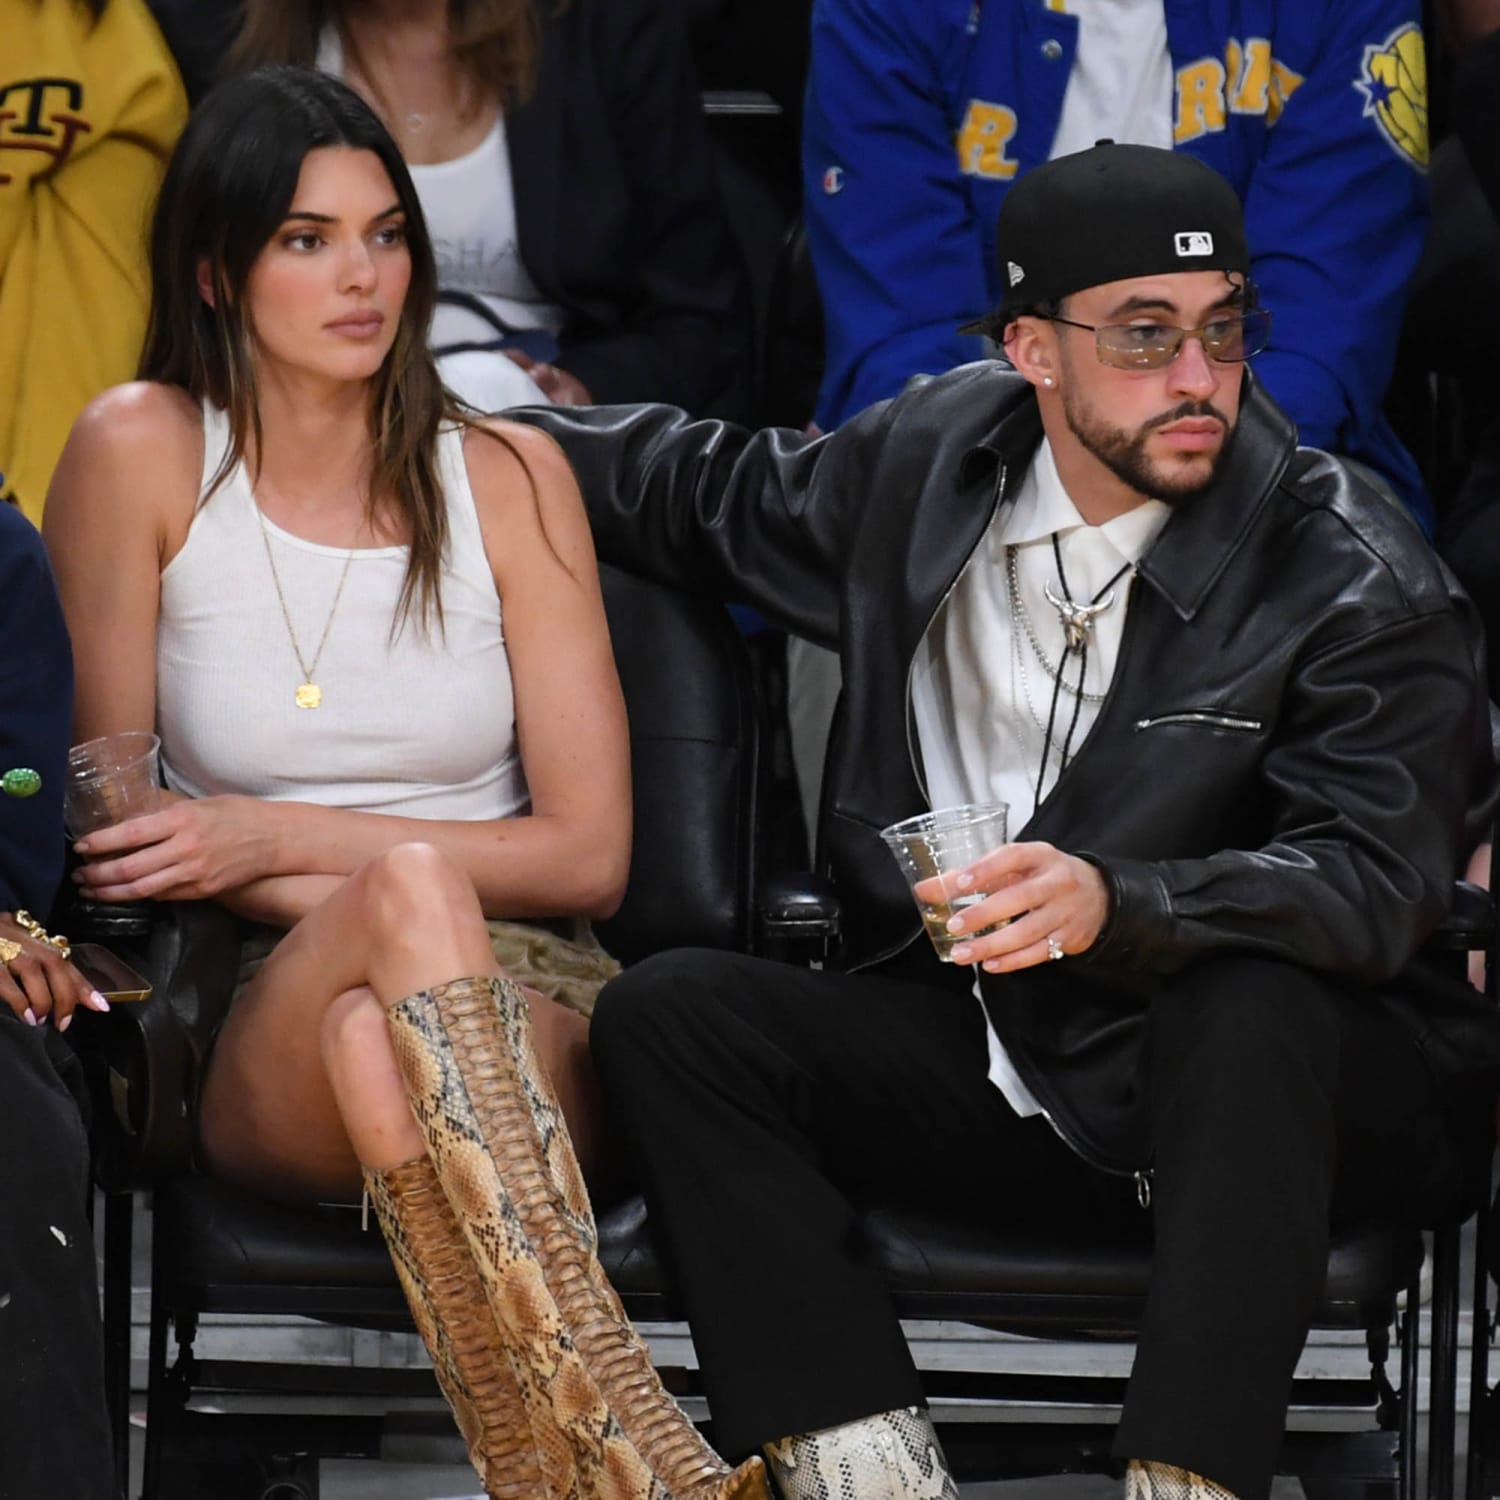 Kendall Jenner and Bad Bunny Go Instagram Official in New Gucci Campaign